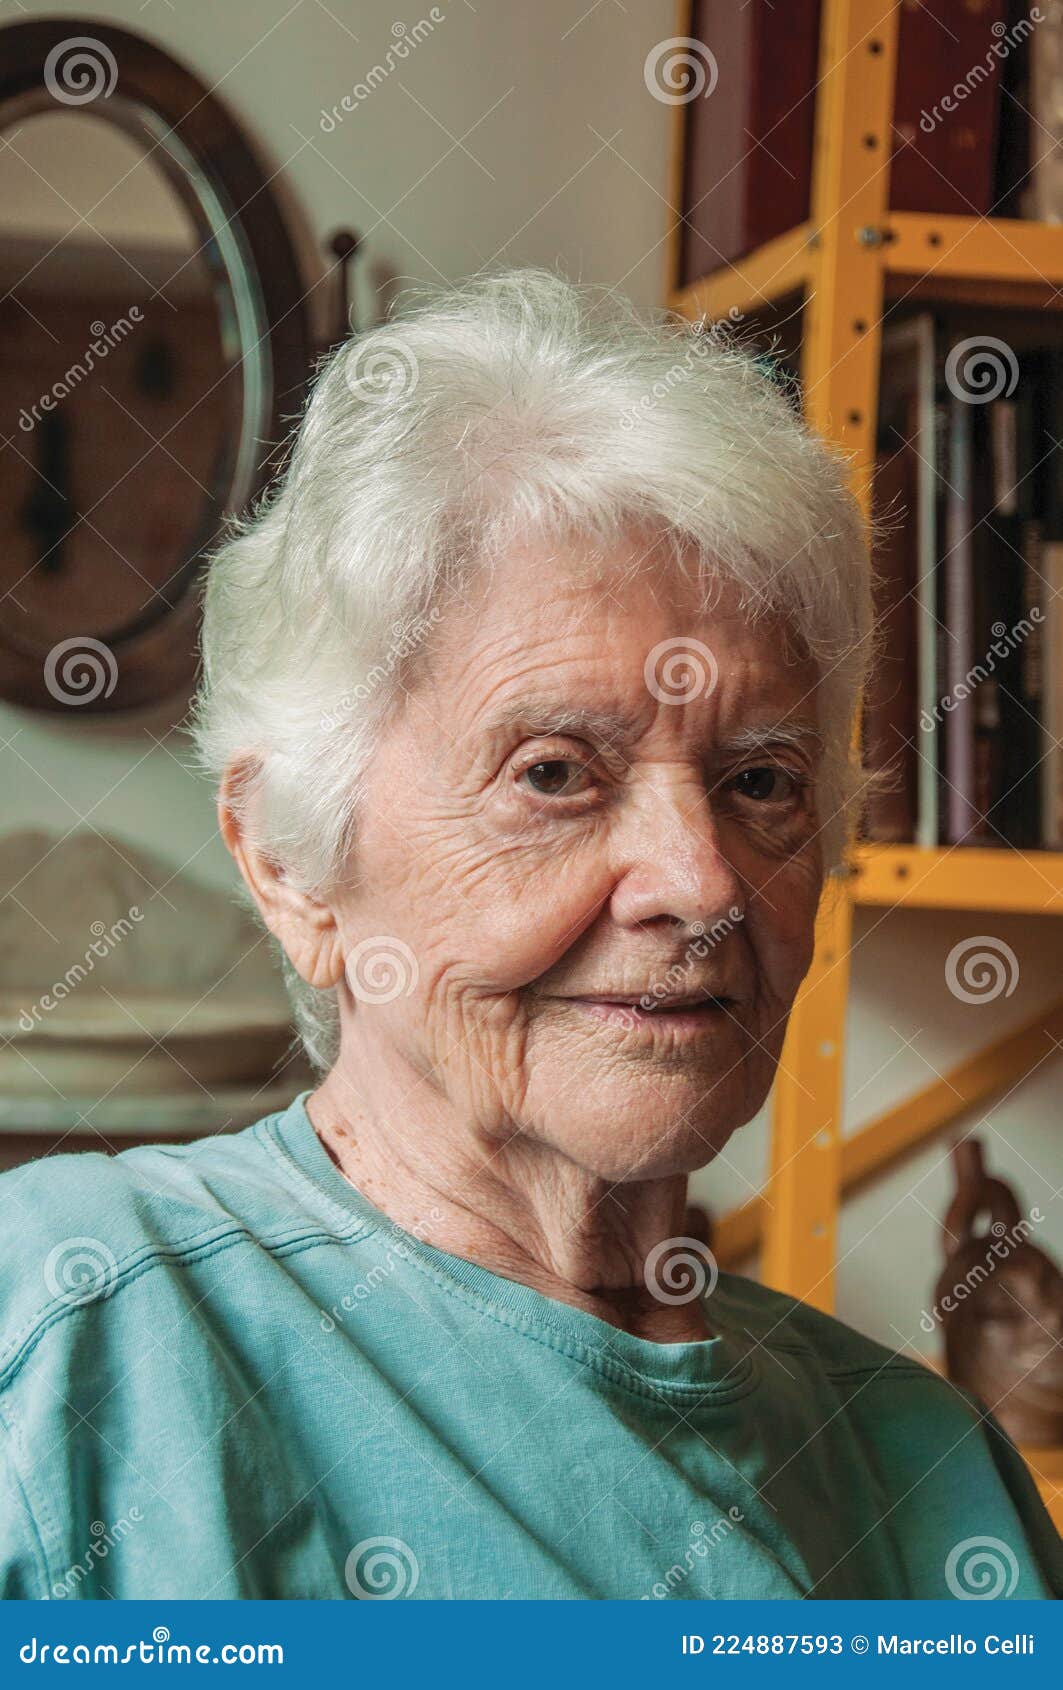 Portrait of Old Lady with White Hair Stock Image - Image of healthy, adult:  224887593